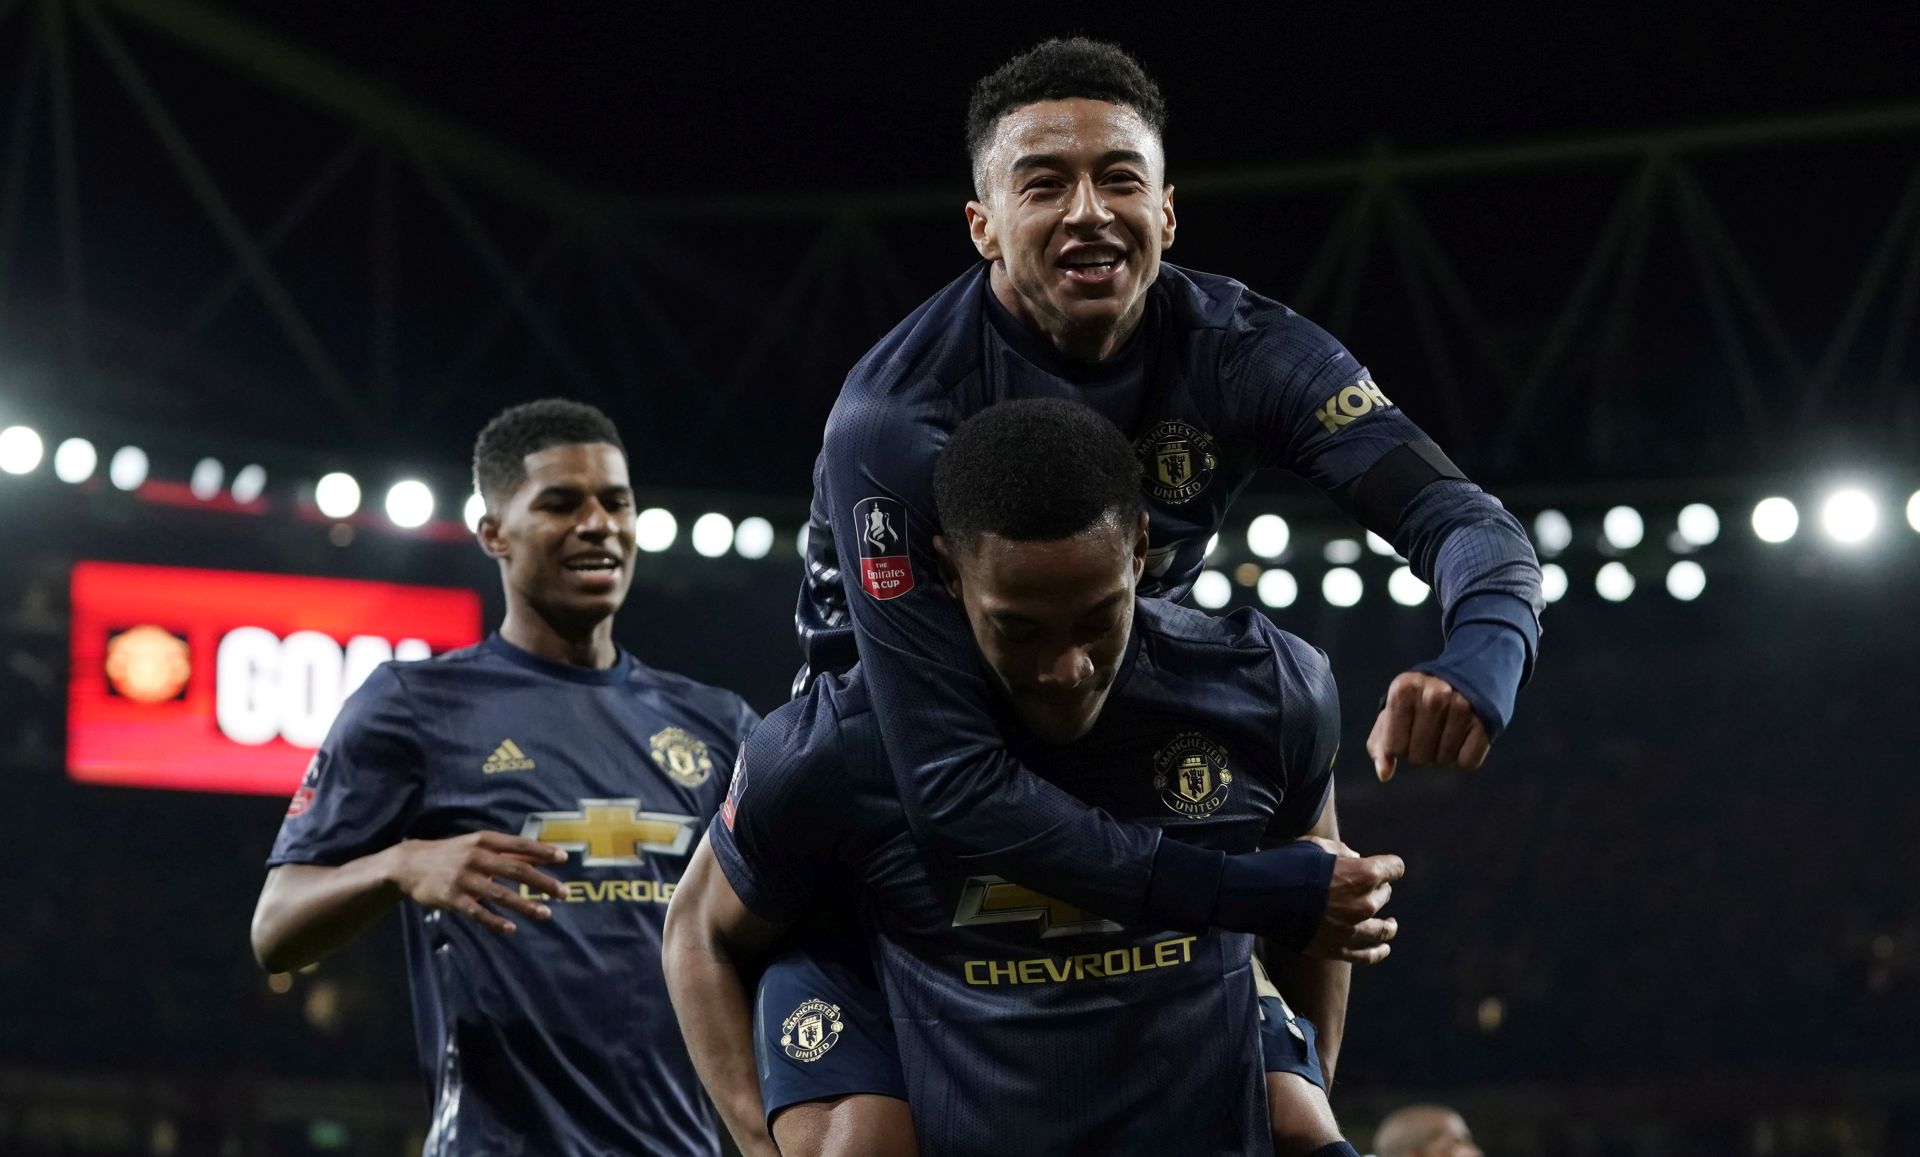 epa07319822 Manchester United's Anthony Martial celebrates with teammate Jesse Lingard after scoring during the English FA Cup fourth round game against Arsenal at Emirates Stadium, London , Britain, 25 January 2019.  EPA/WILL OLIVER EDITORIAL USE ONLY. No use with unauthorized audio, video, data, fixture lists, club/league logos or 'live' services. Online in-match use limited to 120 images, no video emulation. No use in betting, games or single club/league/player publications